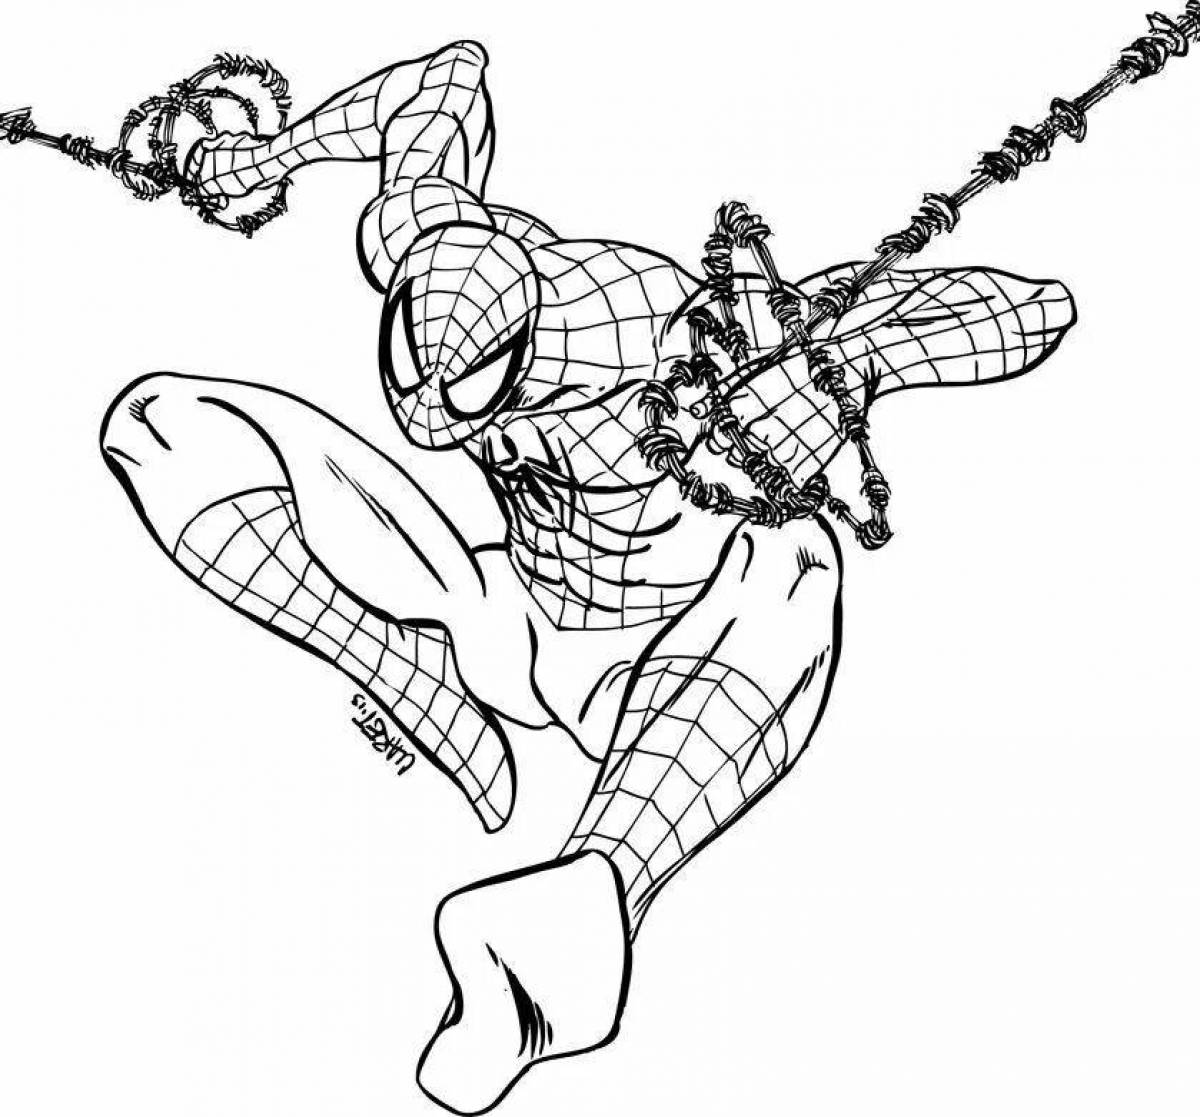 Awesome batman and spiderman coloring pages